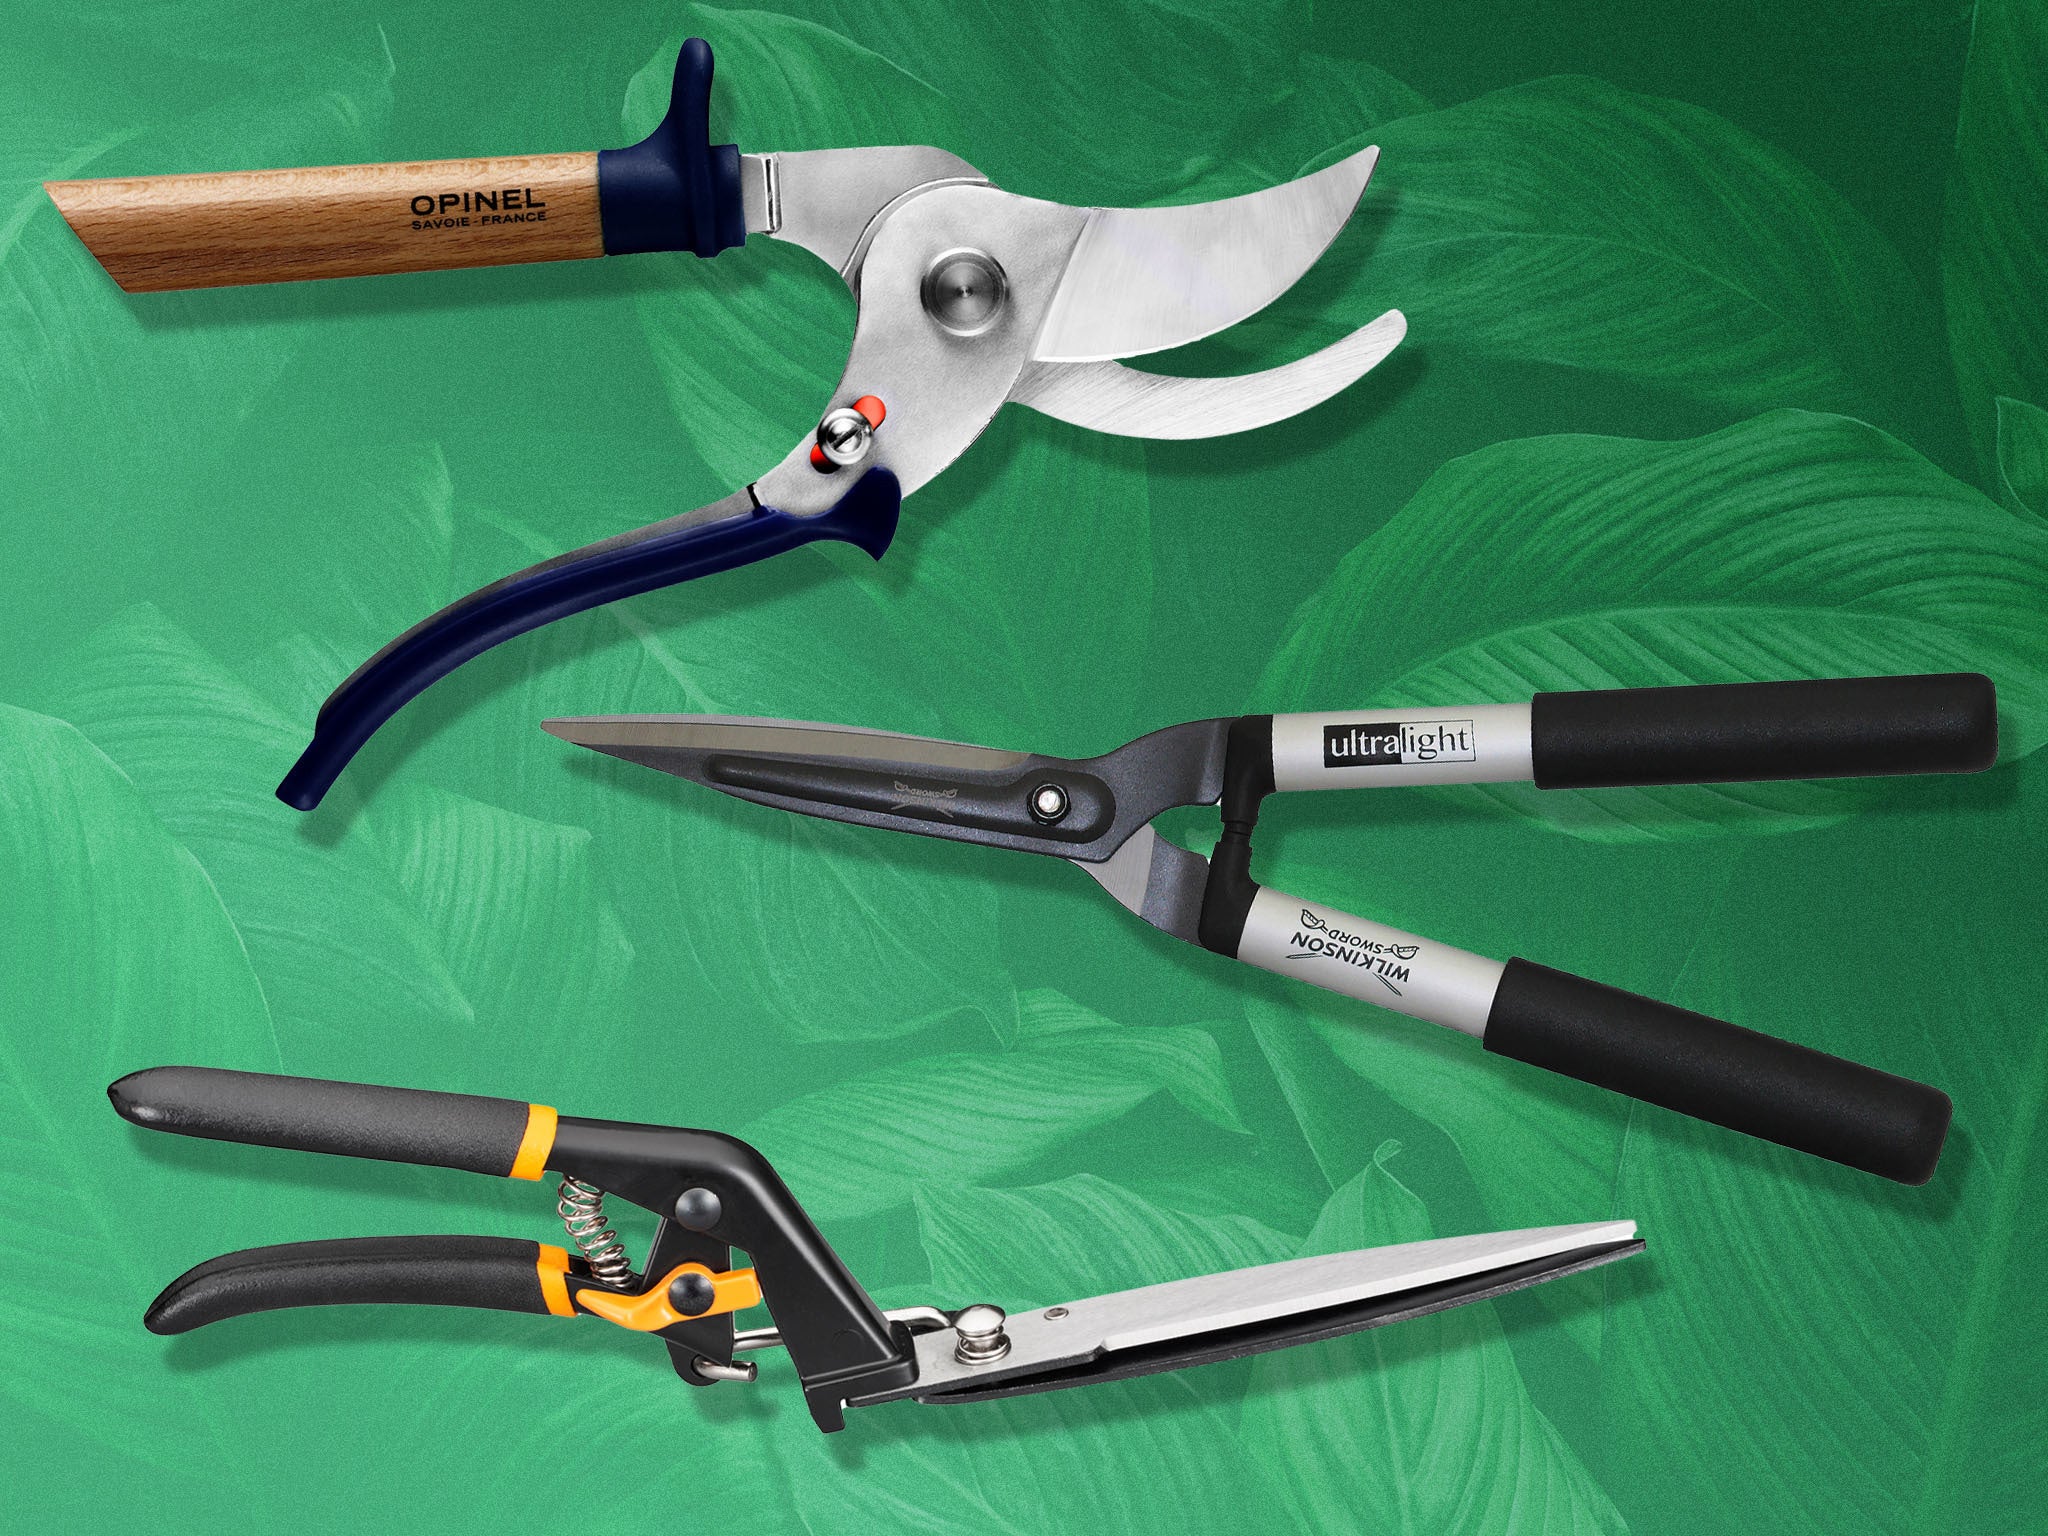 We can tell our potato forks from our pruners, and know what to look for in our essential tools